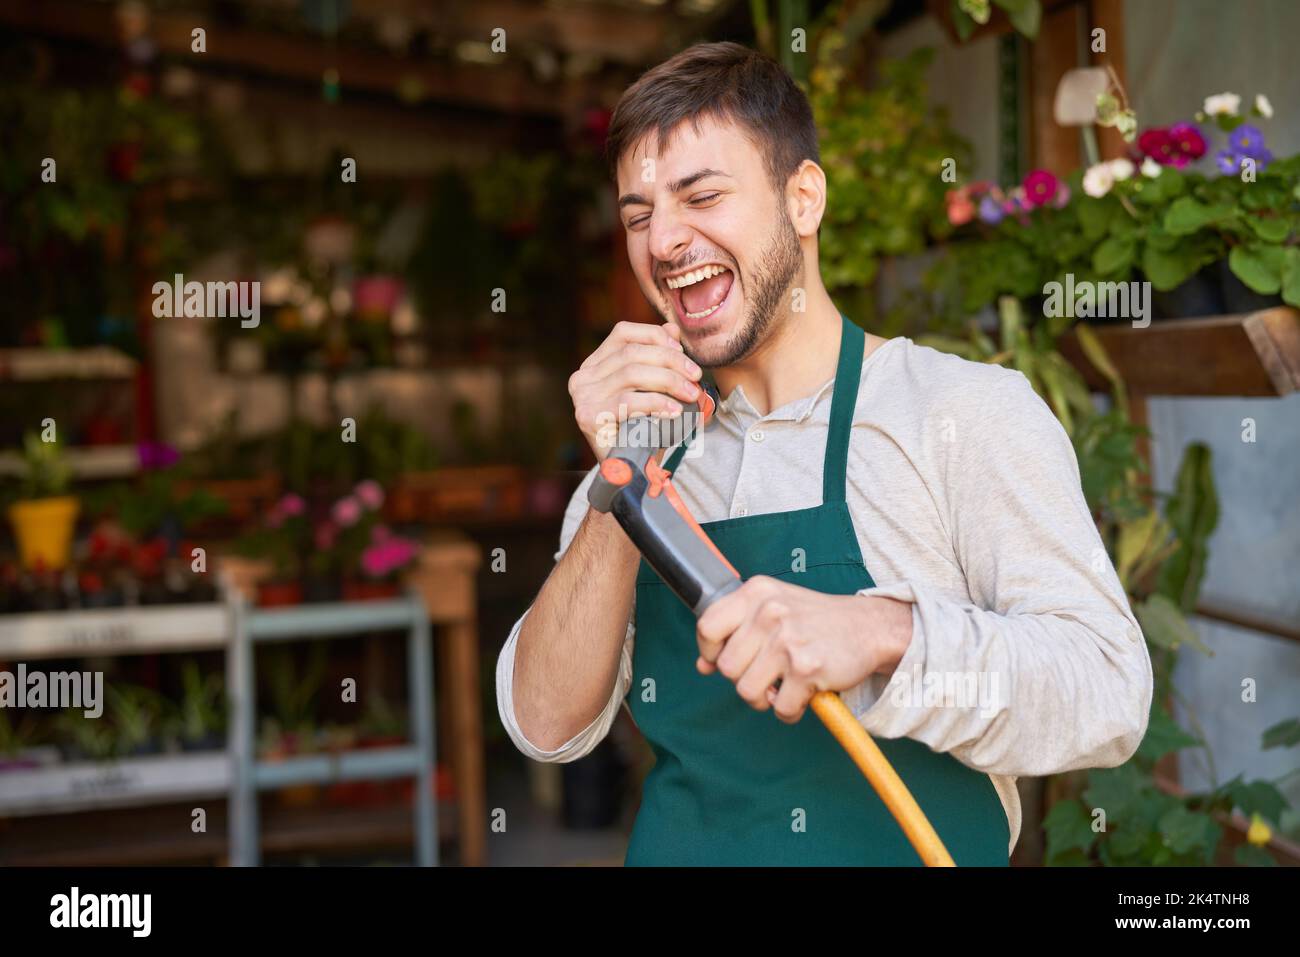 Cheerful gardener apprentice with garden hose sings out of high spirits and joie de vivre Stock Photo